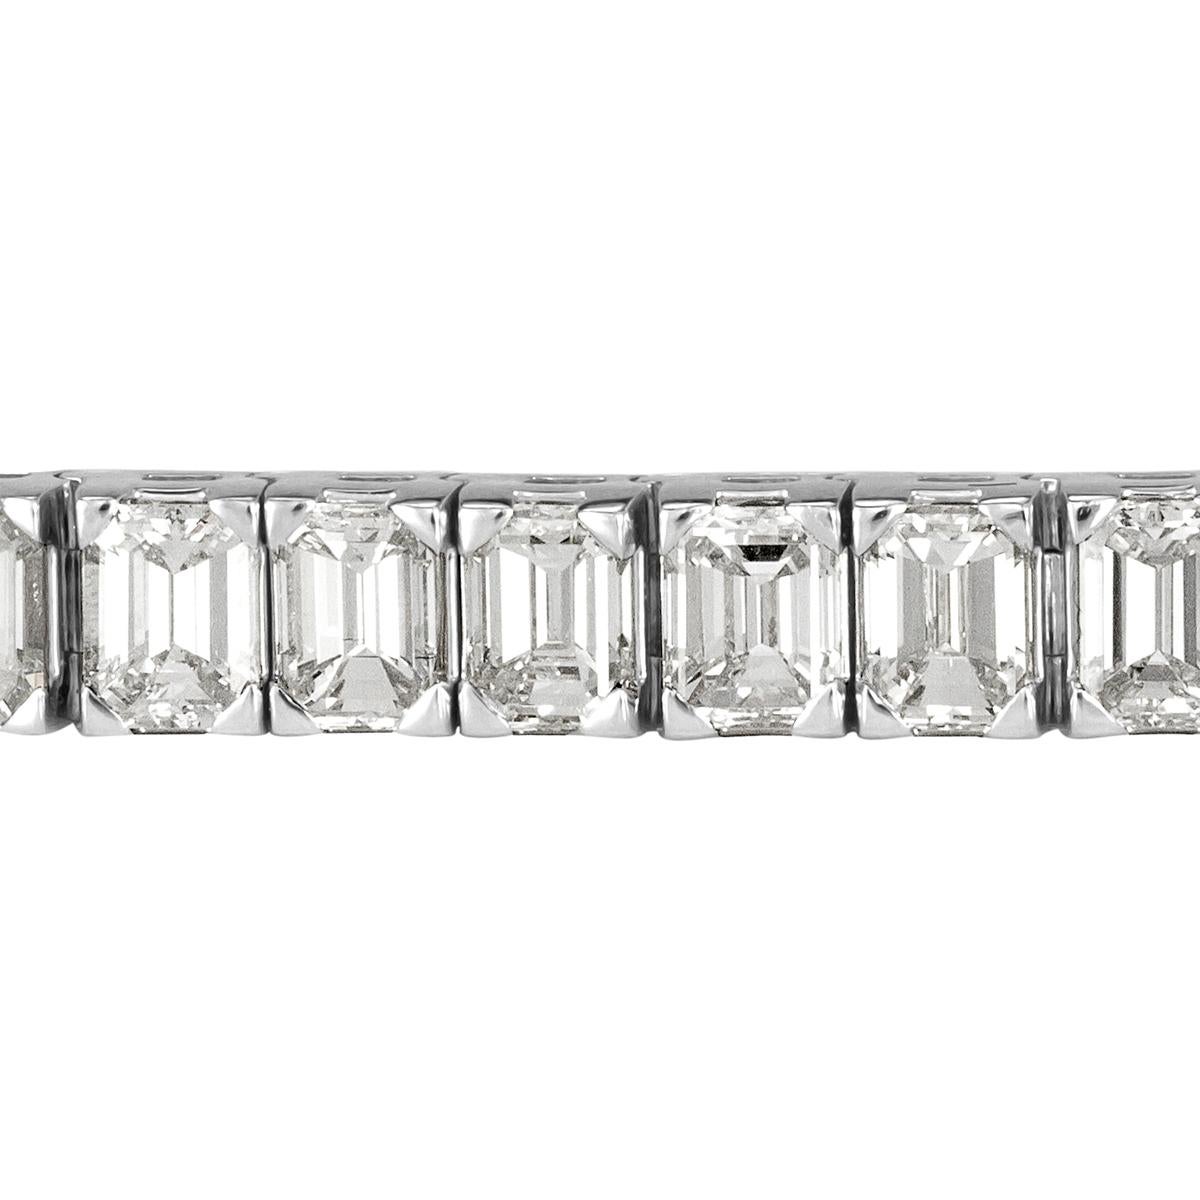 Custom designed in a luxurious 18k white gold setting, this stunning diamond tennis bracelet features 11.47ct of seamlessly matched emerald cut diamonds graded at G-H in color, VS1-VS2 in clarity. Each of the diamonds is hand selected and average